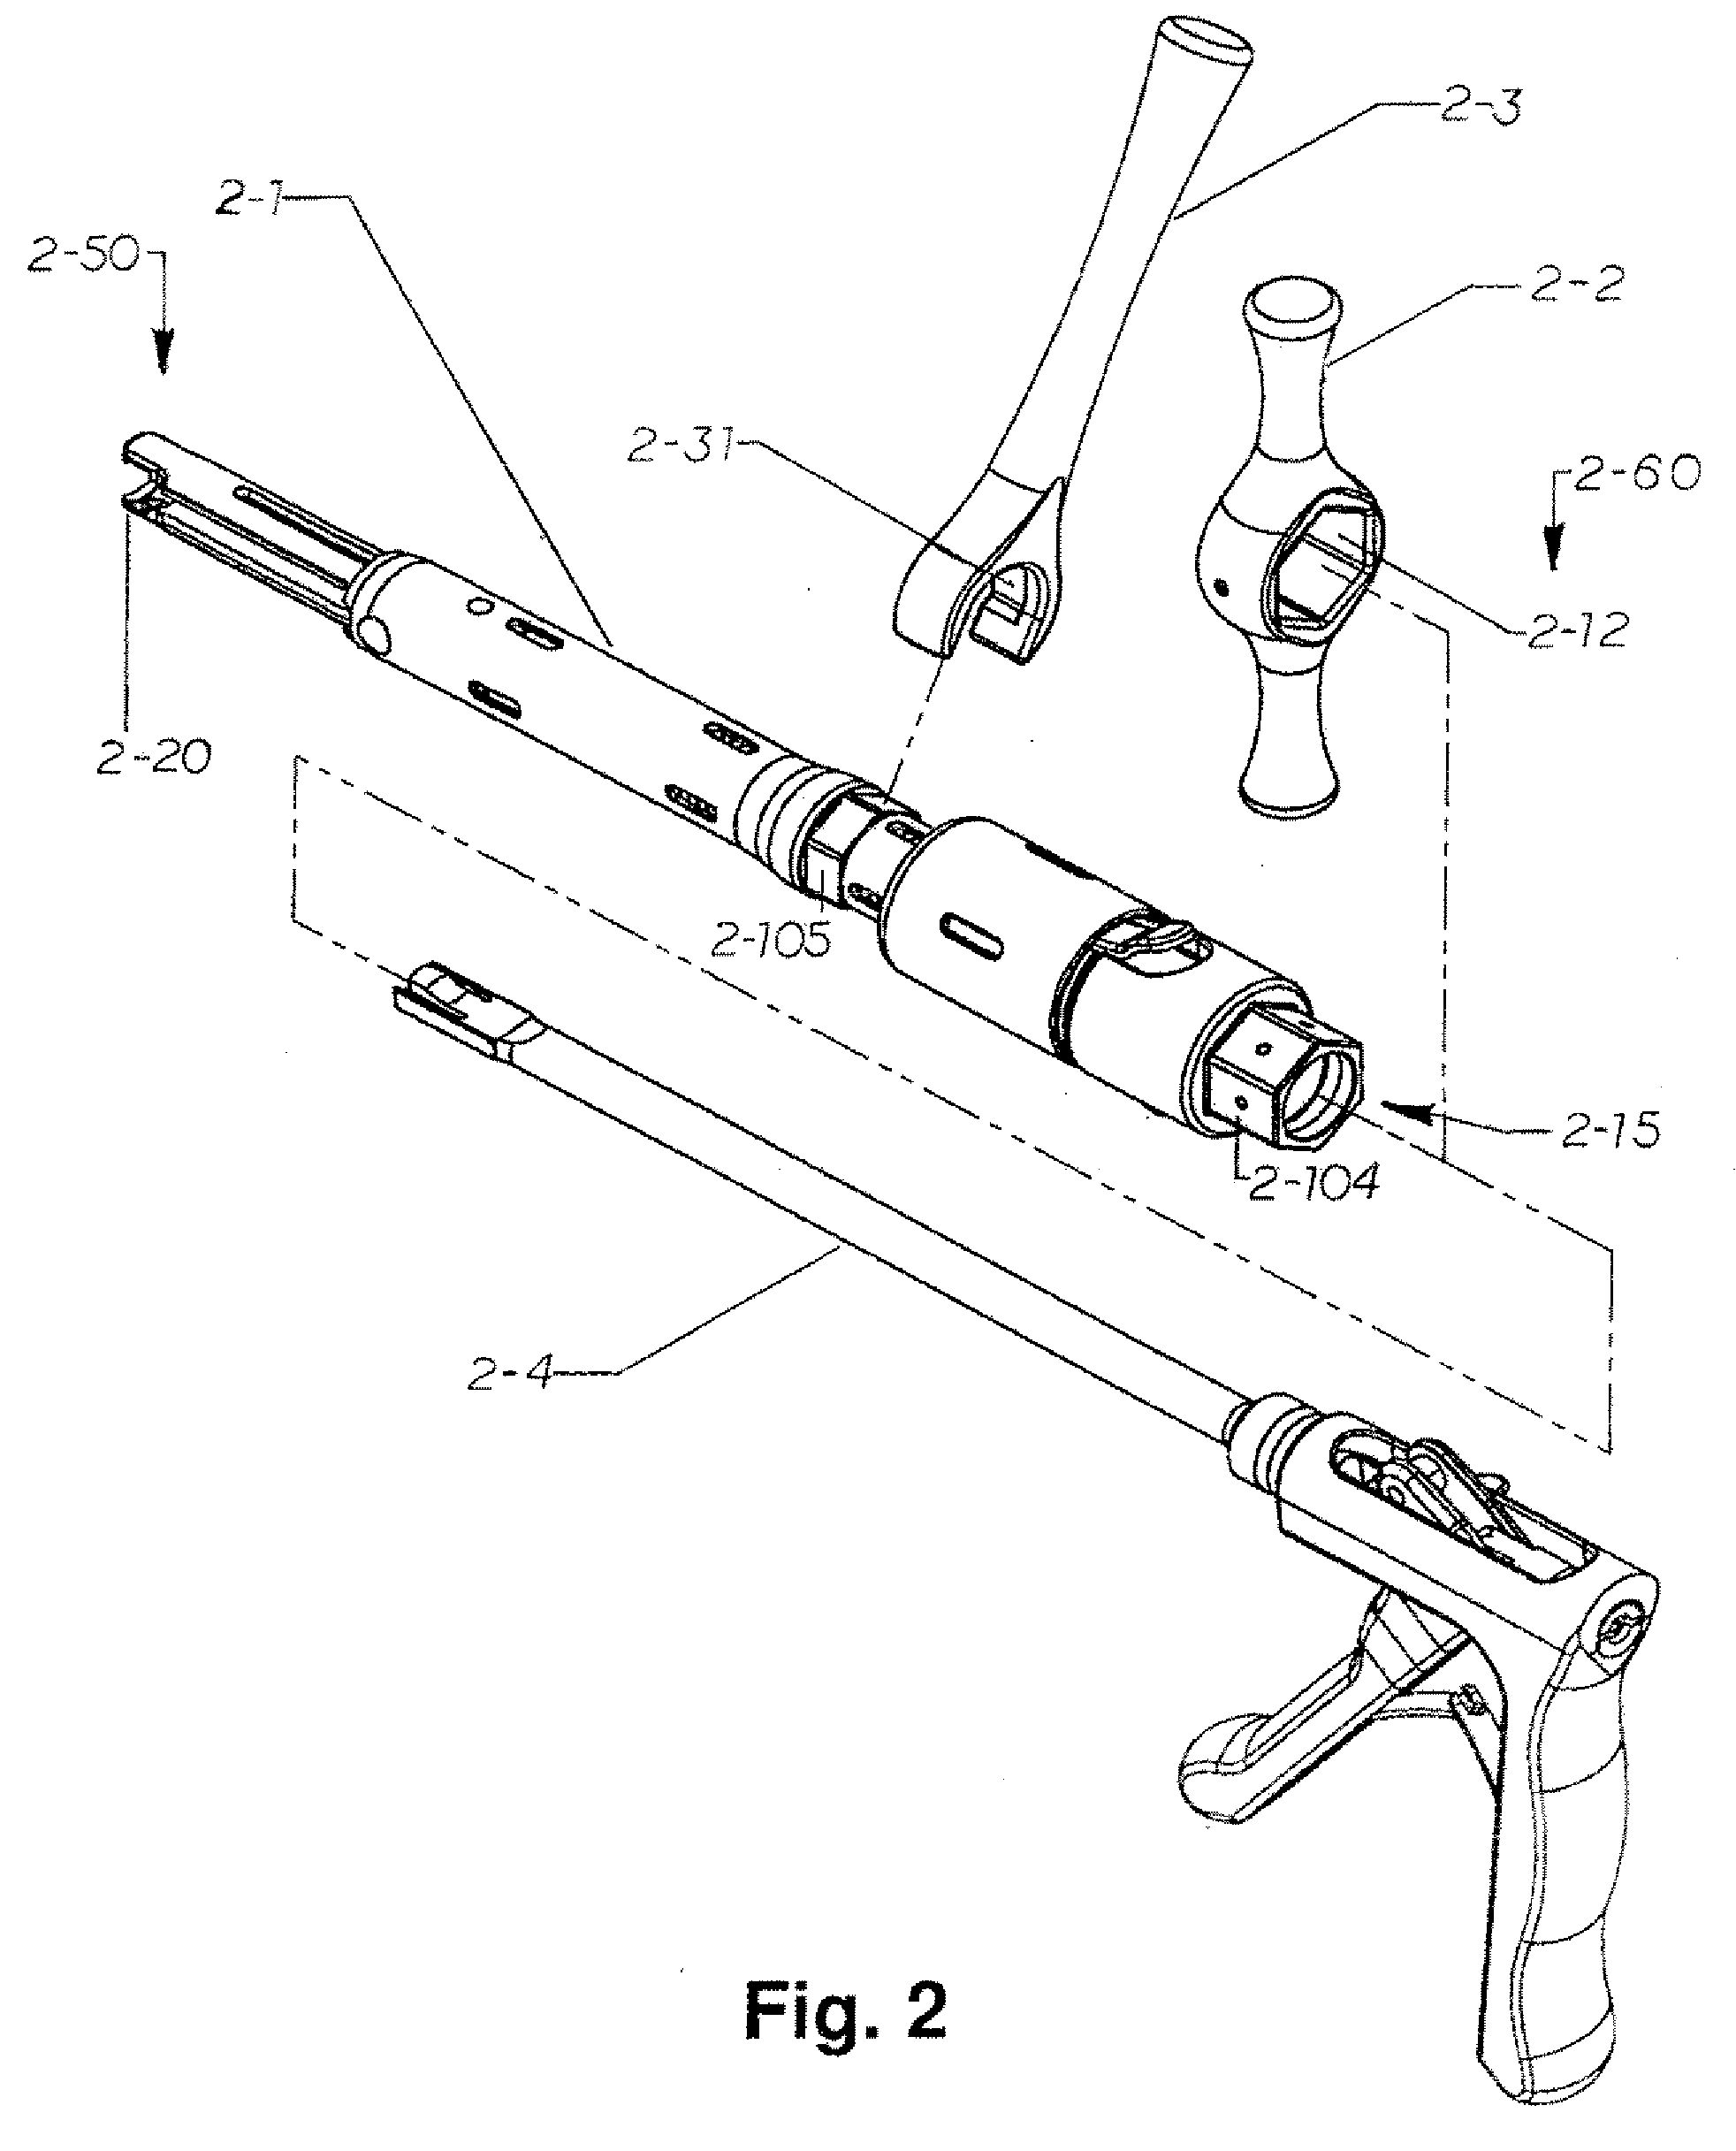 Spinal Rod Reducer and Cap Insertion Apparatus